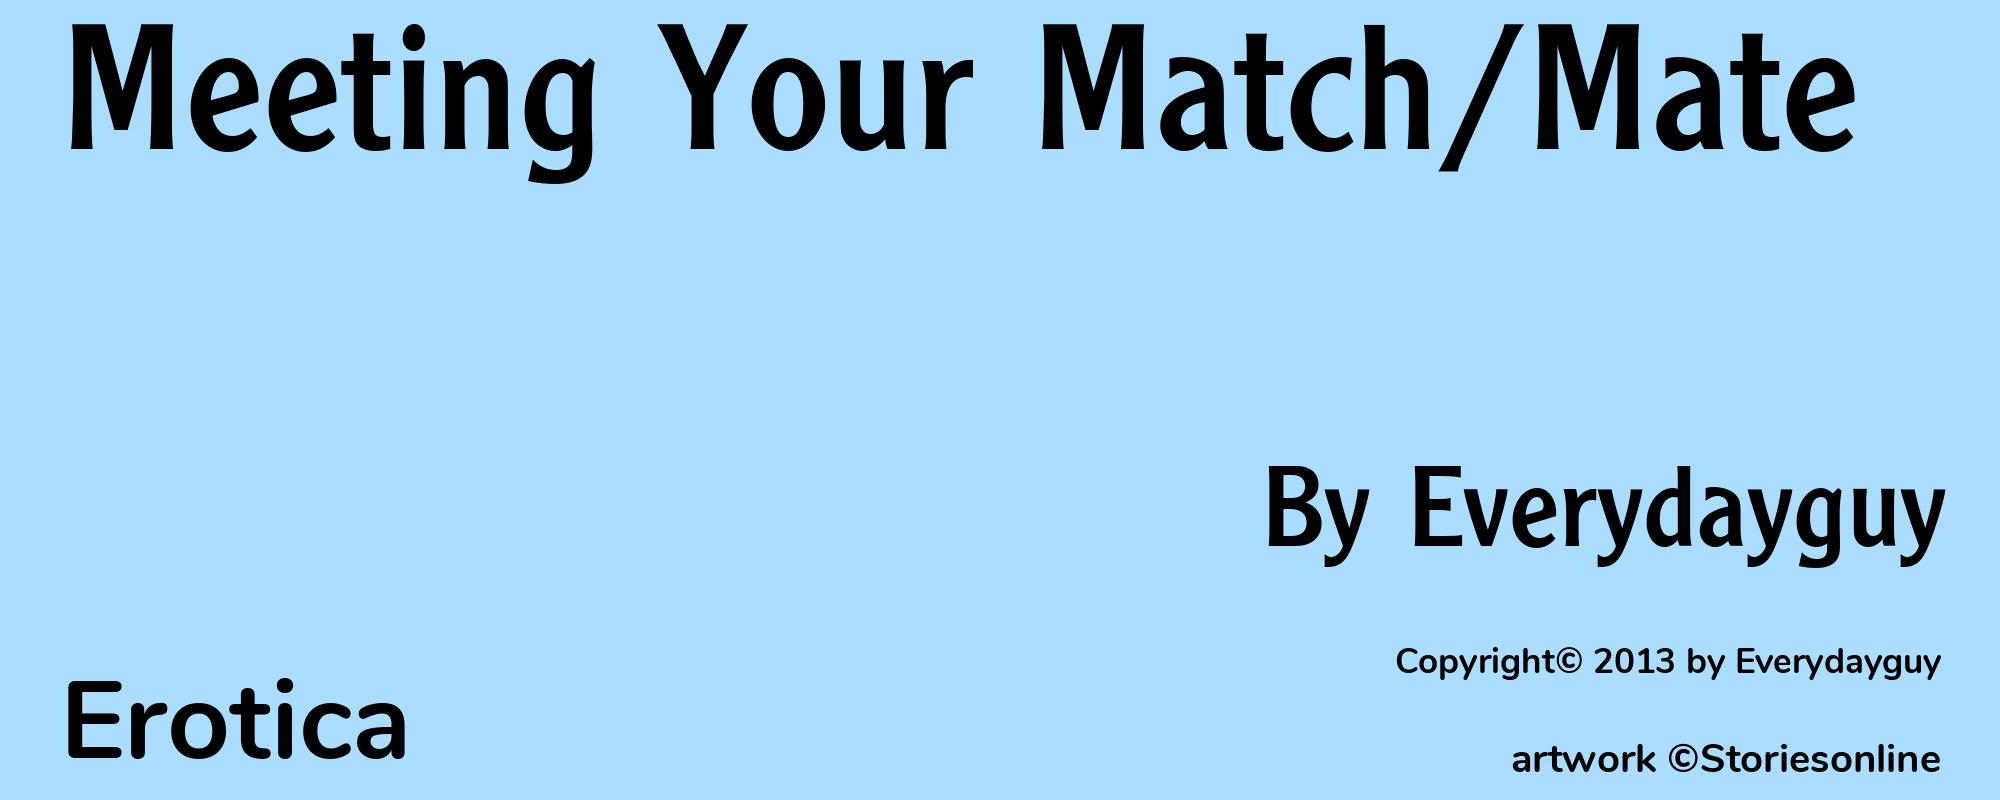 Meeting Your Match/Mate - Cover